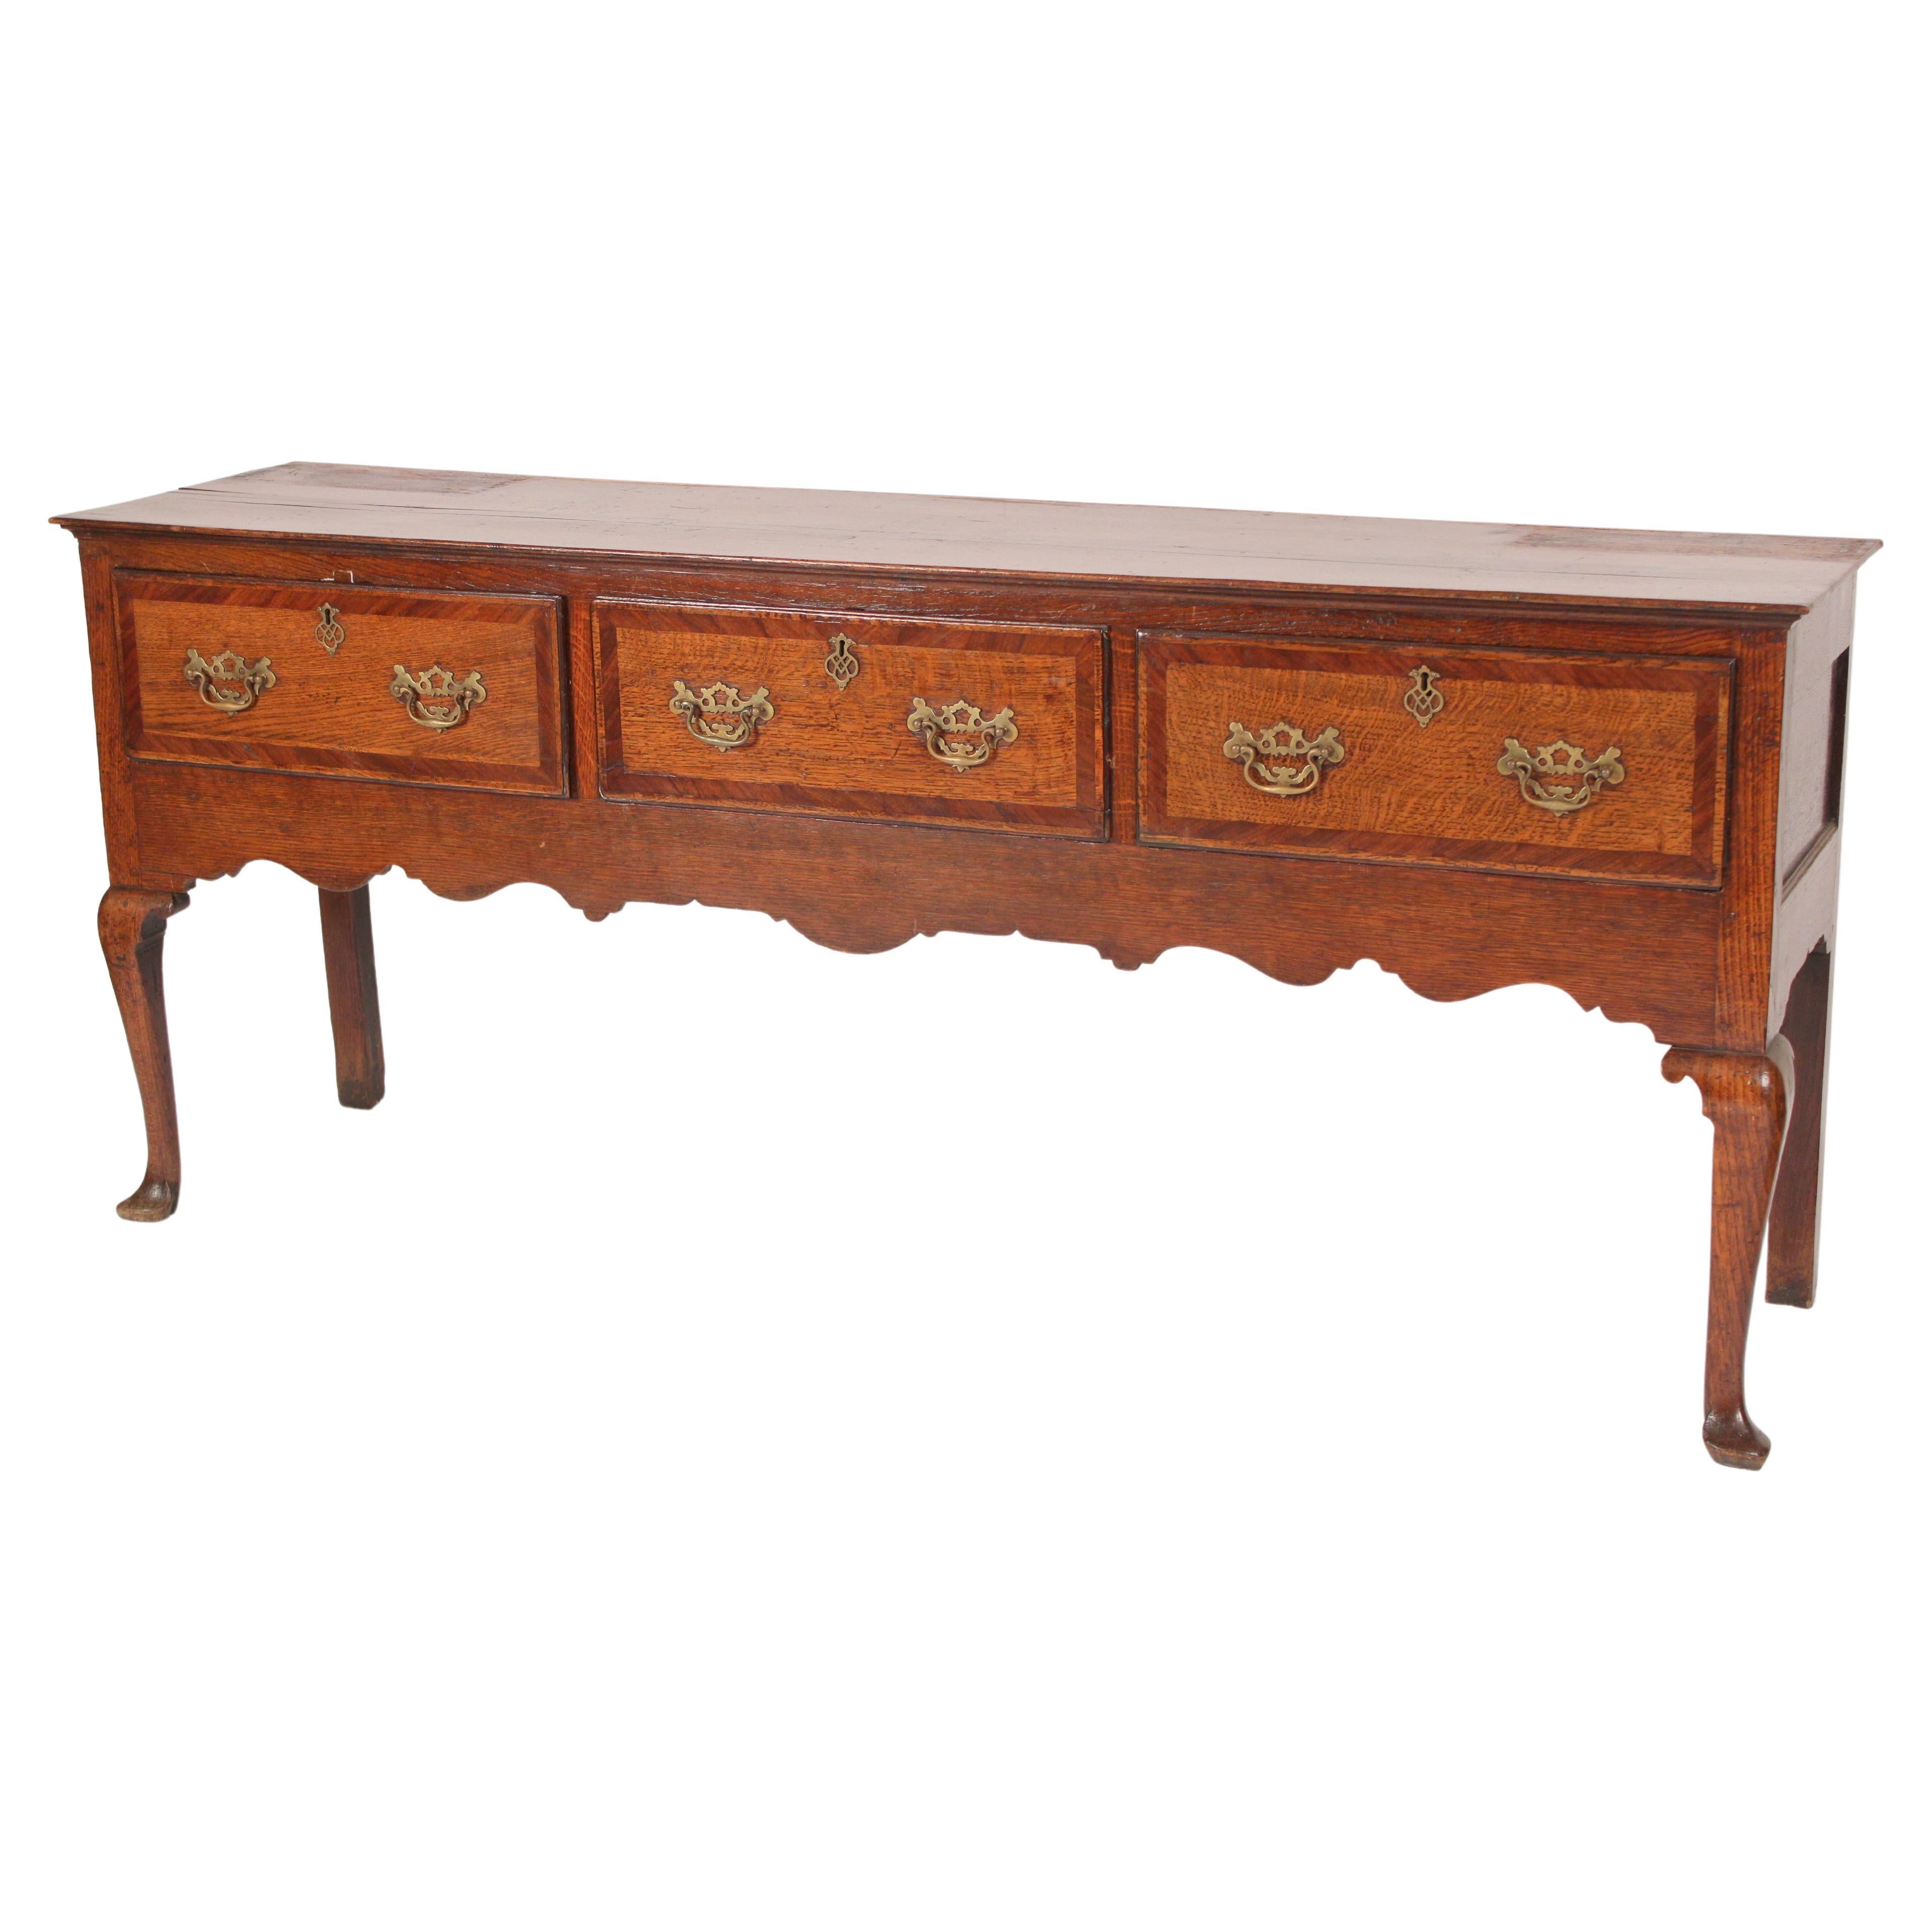 Antique English Queen Anne Style Sideboard